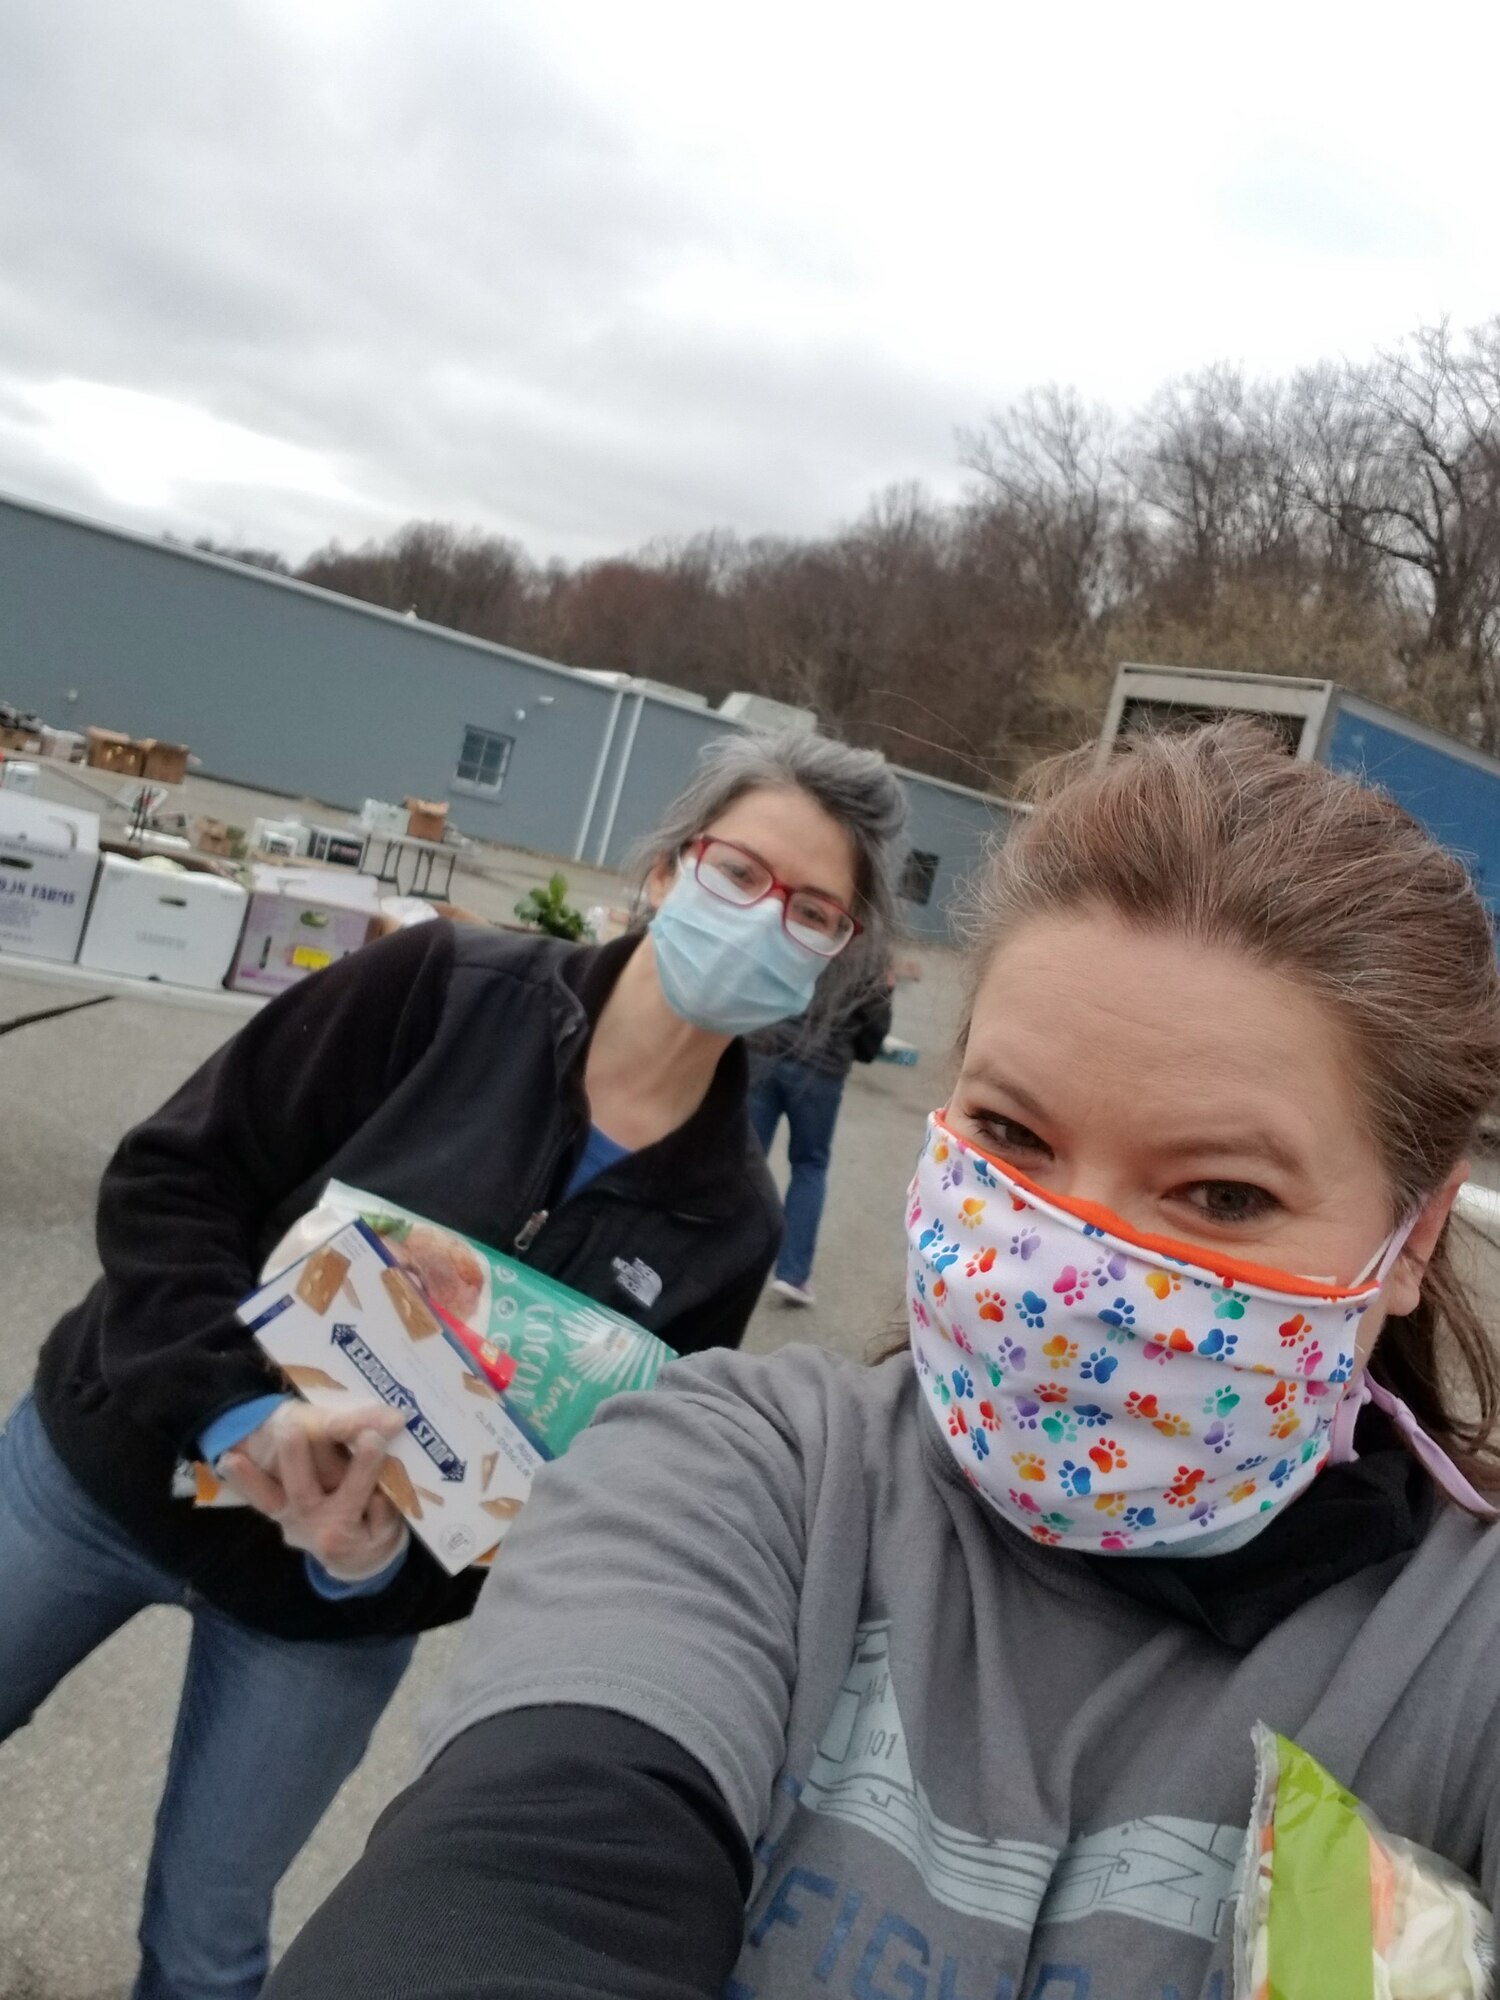 Lisa Potito, wellness team coordinator, right, and Mary Keeler, sexual assault response coordinator, left, help distribute food at a local nonprofit organization farmers market free for the military, April 4, 2020. (Courtesy photo)